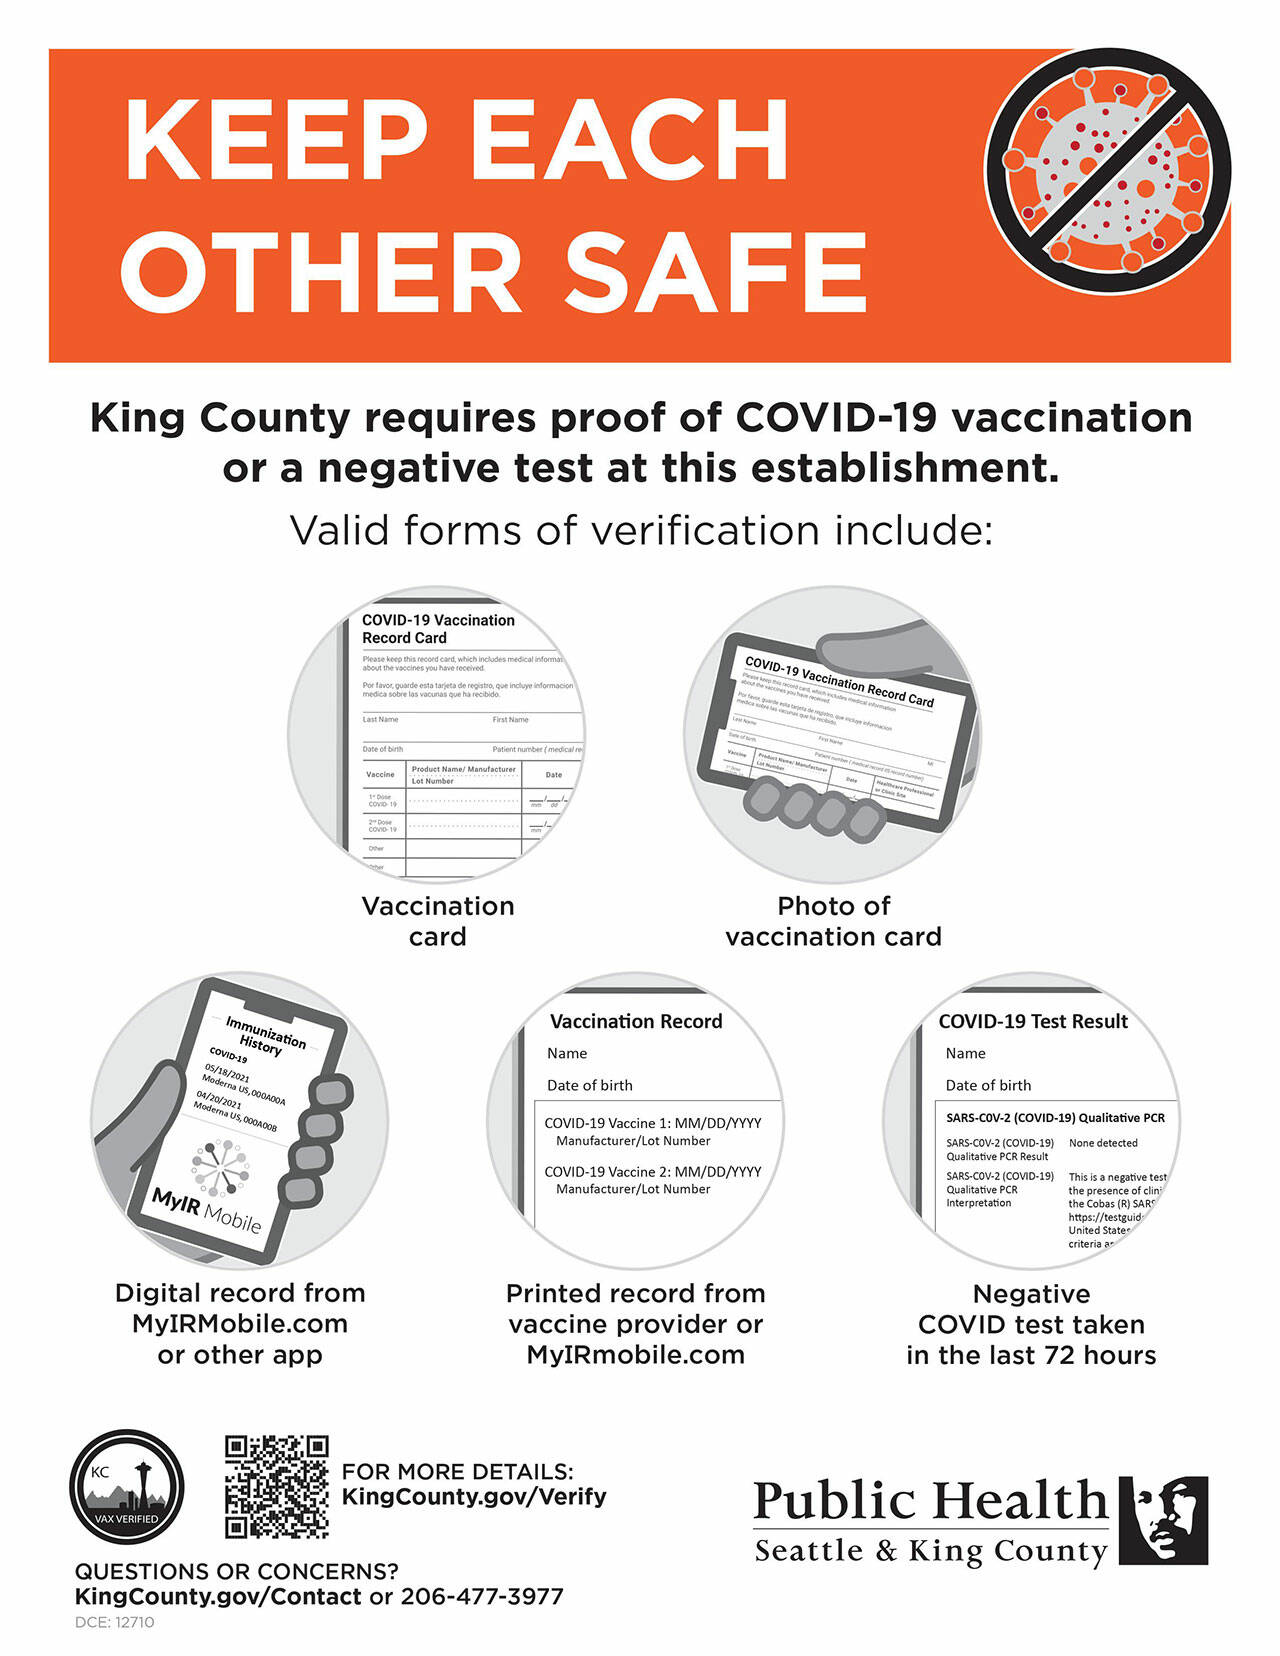 (Image Courtesy Public Health Seattle & King County) This signage is required to be displayed at public entrances for establishments and events included in the new vaccination verification mandate.